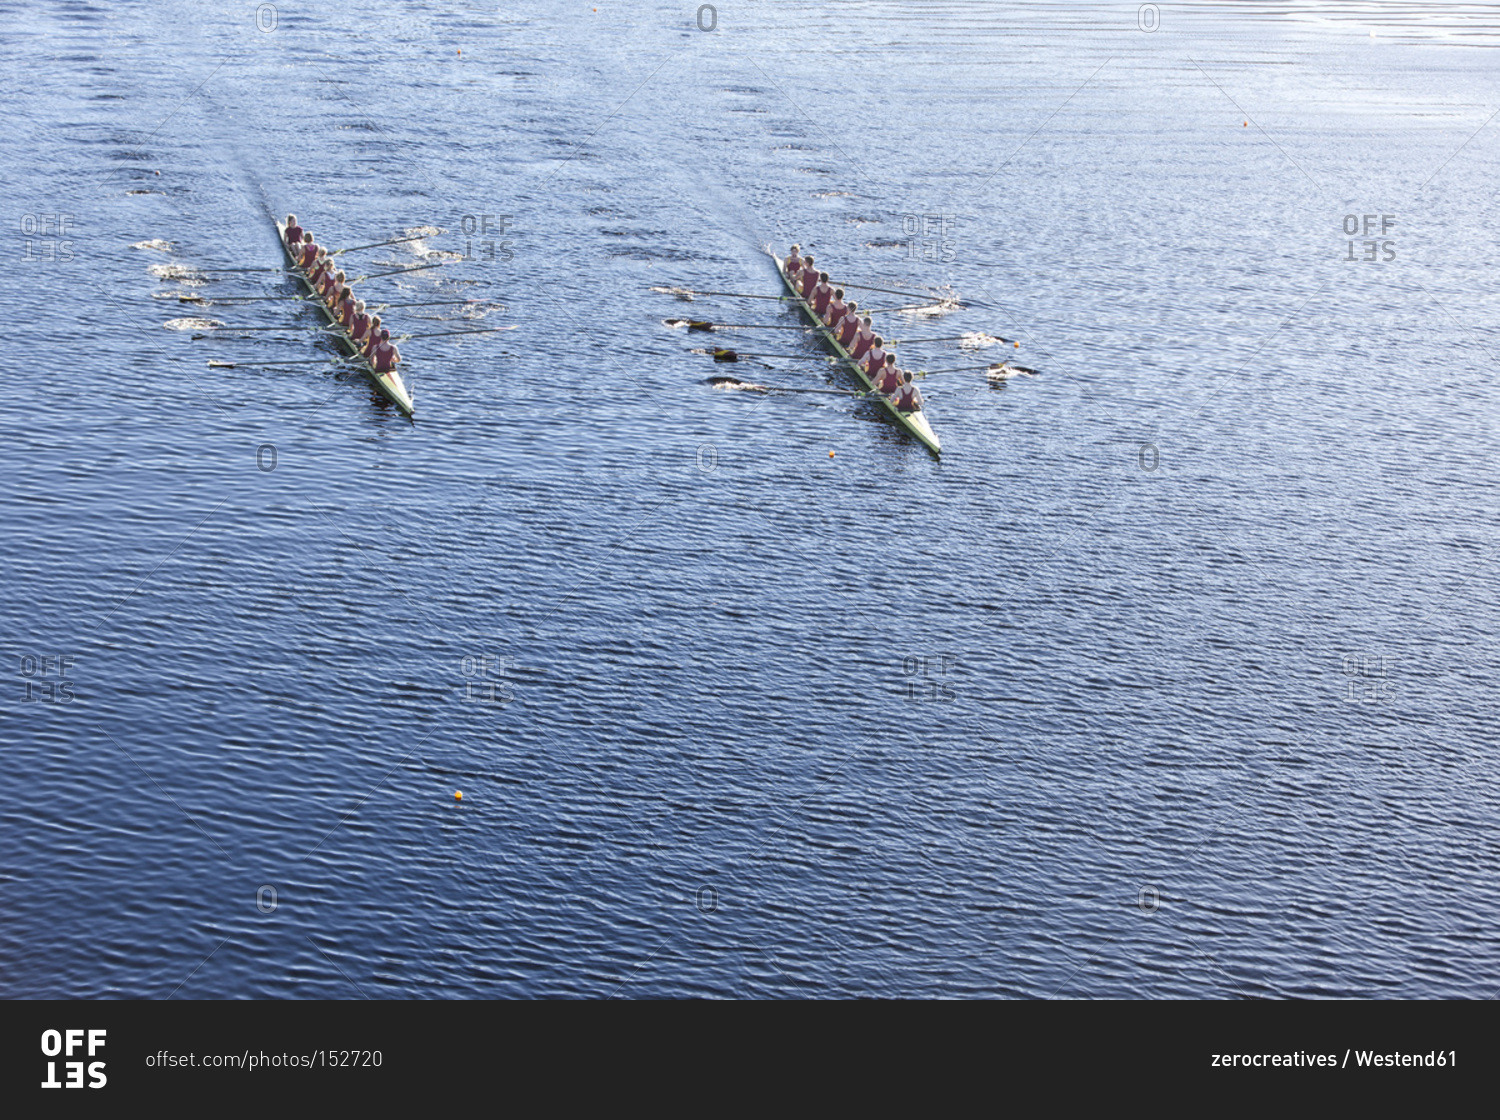 Elevated view of two rowing eights in water